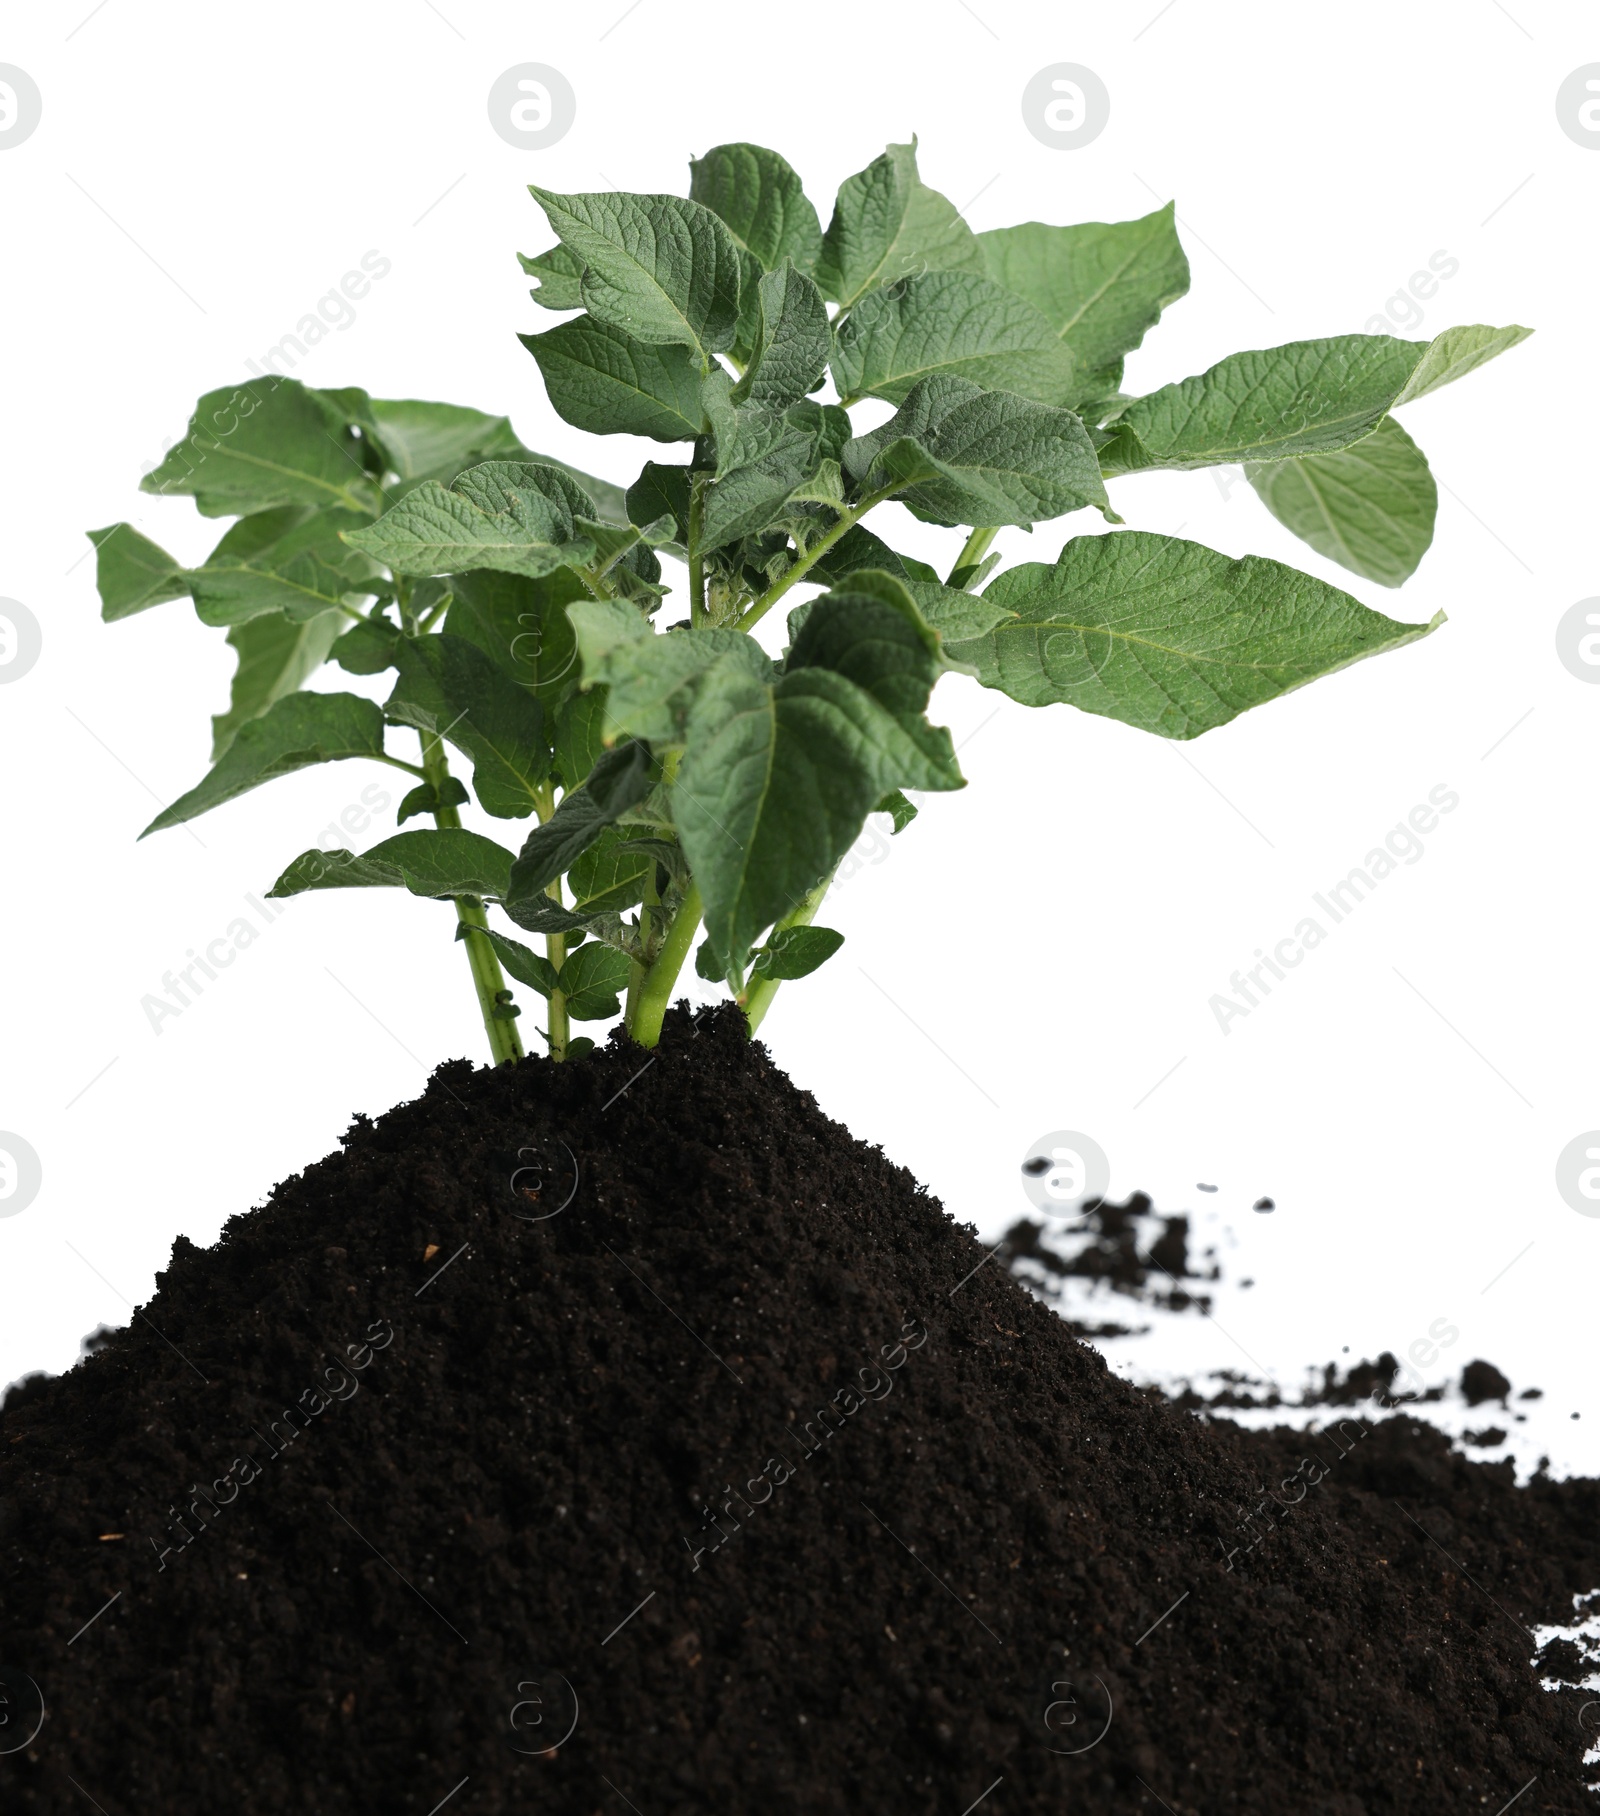 Photo of Green potato seedling and soil isolated on white